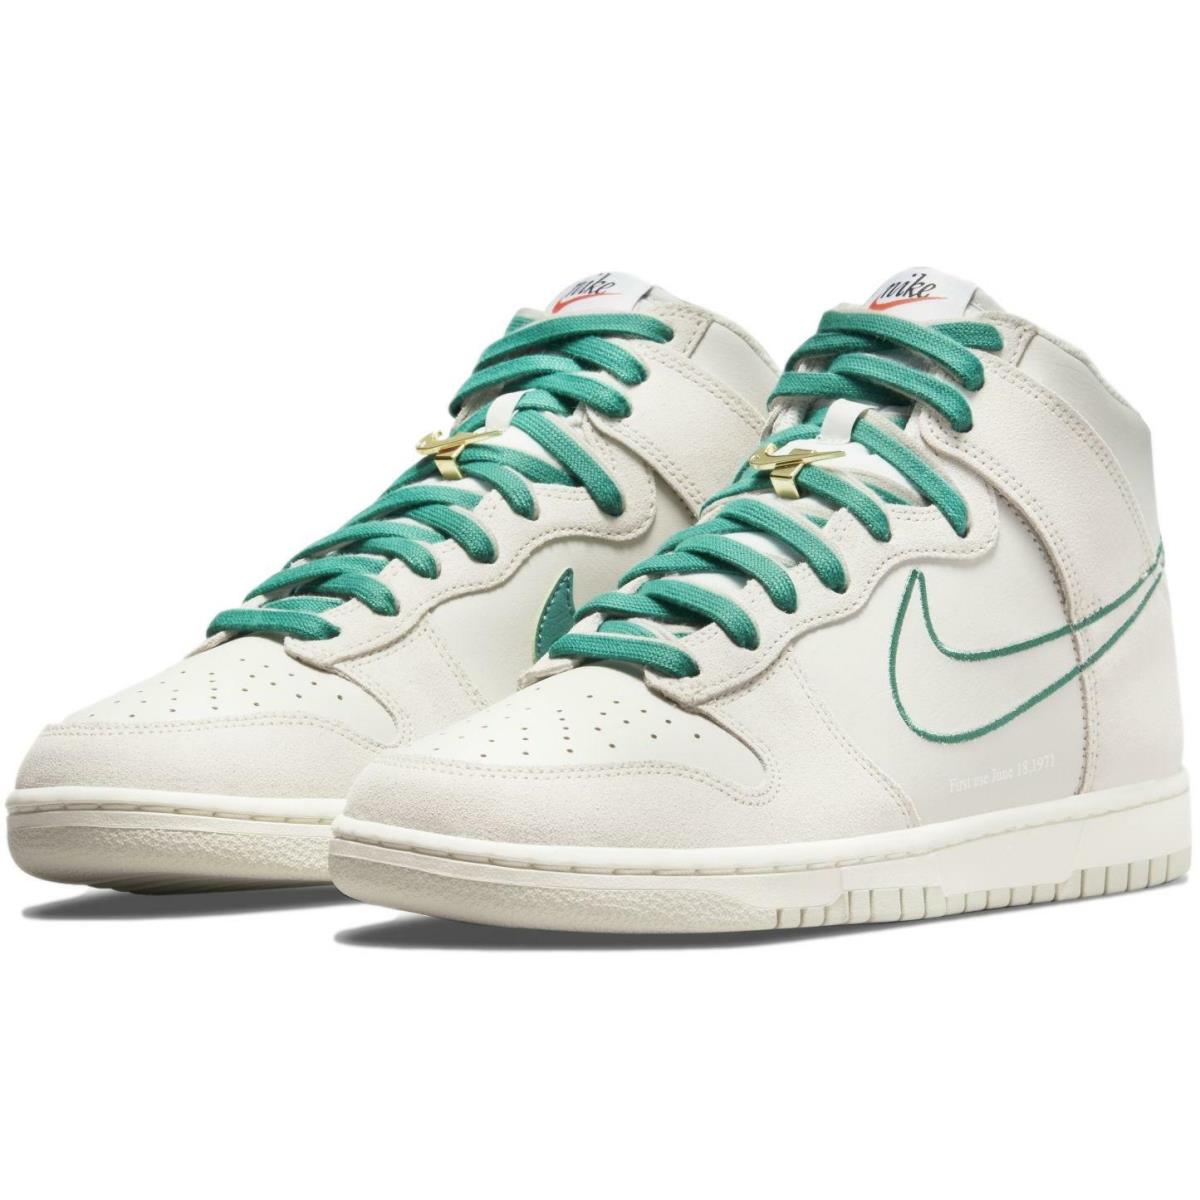 Nike Men`s Dunk High SE `first Use Pack - Green Noise` Shoes Sneakers DH0960-001 - Light Bone/Green Noise